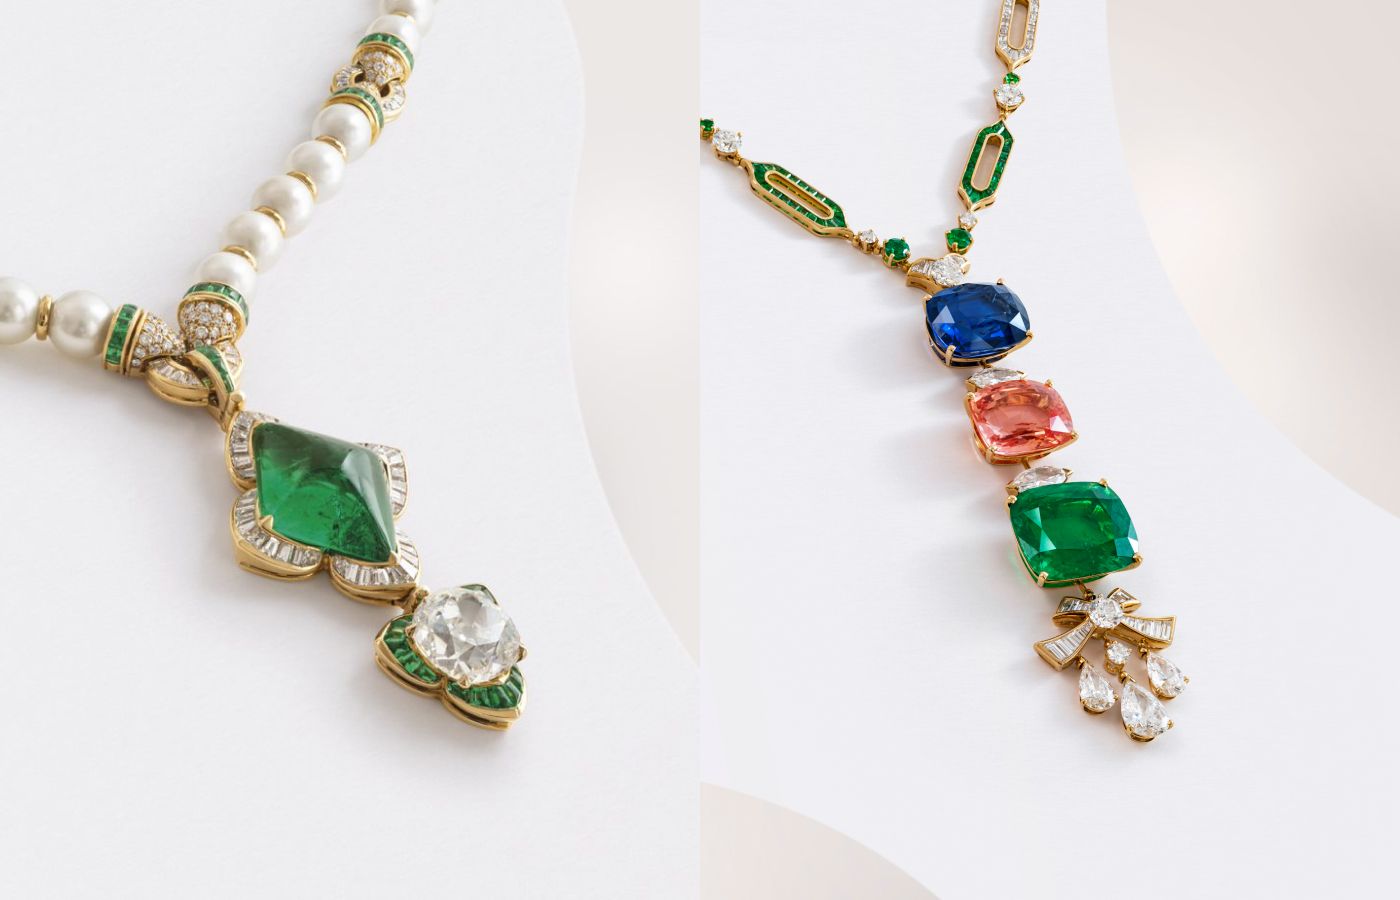  Bulgari necklace (left) with a lozenge-shaped cabochon emerald of 21.53 carats, cushion-shaped old-cut diamond of 9.06 carats, rectangular-shaped buff-top emeralds, baguette-cut and round diamonds in 18k gold (Lot 81) and a Bulgari necklace with a cushion-shaped modified brilliant-cut sapphire of 37.84 carats, Padparadscha sapphire of 33.59 carats and emerald of 33.20 carats, round and square-shaped emeralds, pear brilliant-cut diamonds of 2.85, 1.55 and 1.51 carats, marquise brilliant-cut diamond of 1.53 carats, marquise-shaped, baguette-cut and round diamonds in 18k yellow gold (Lot 79) – Included in the Christie’s The World of Heidi Horten: Magnificent Jewels Part I auction